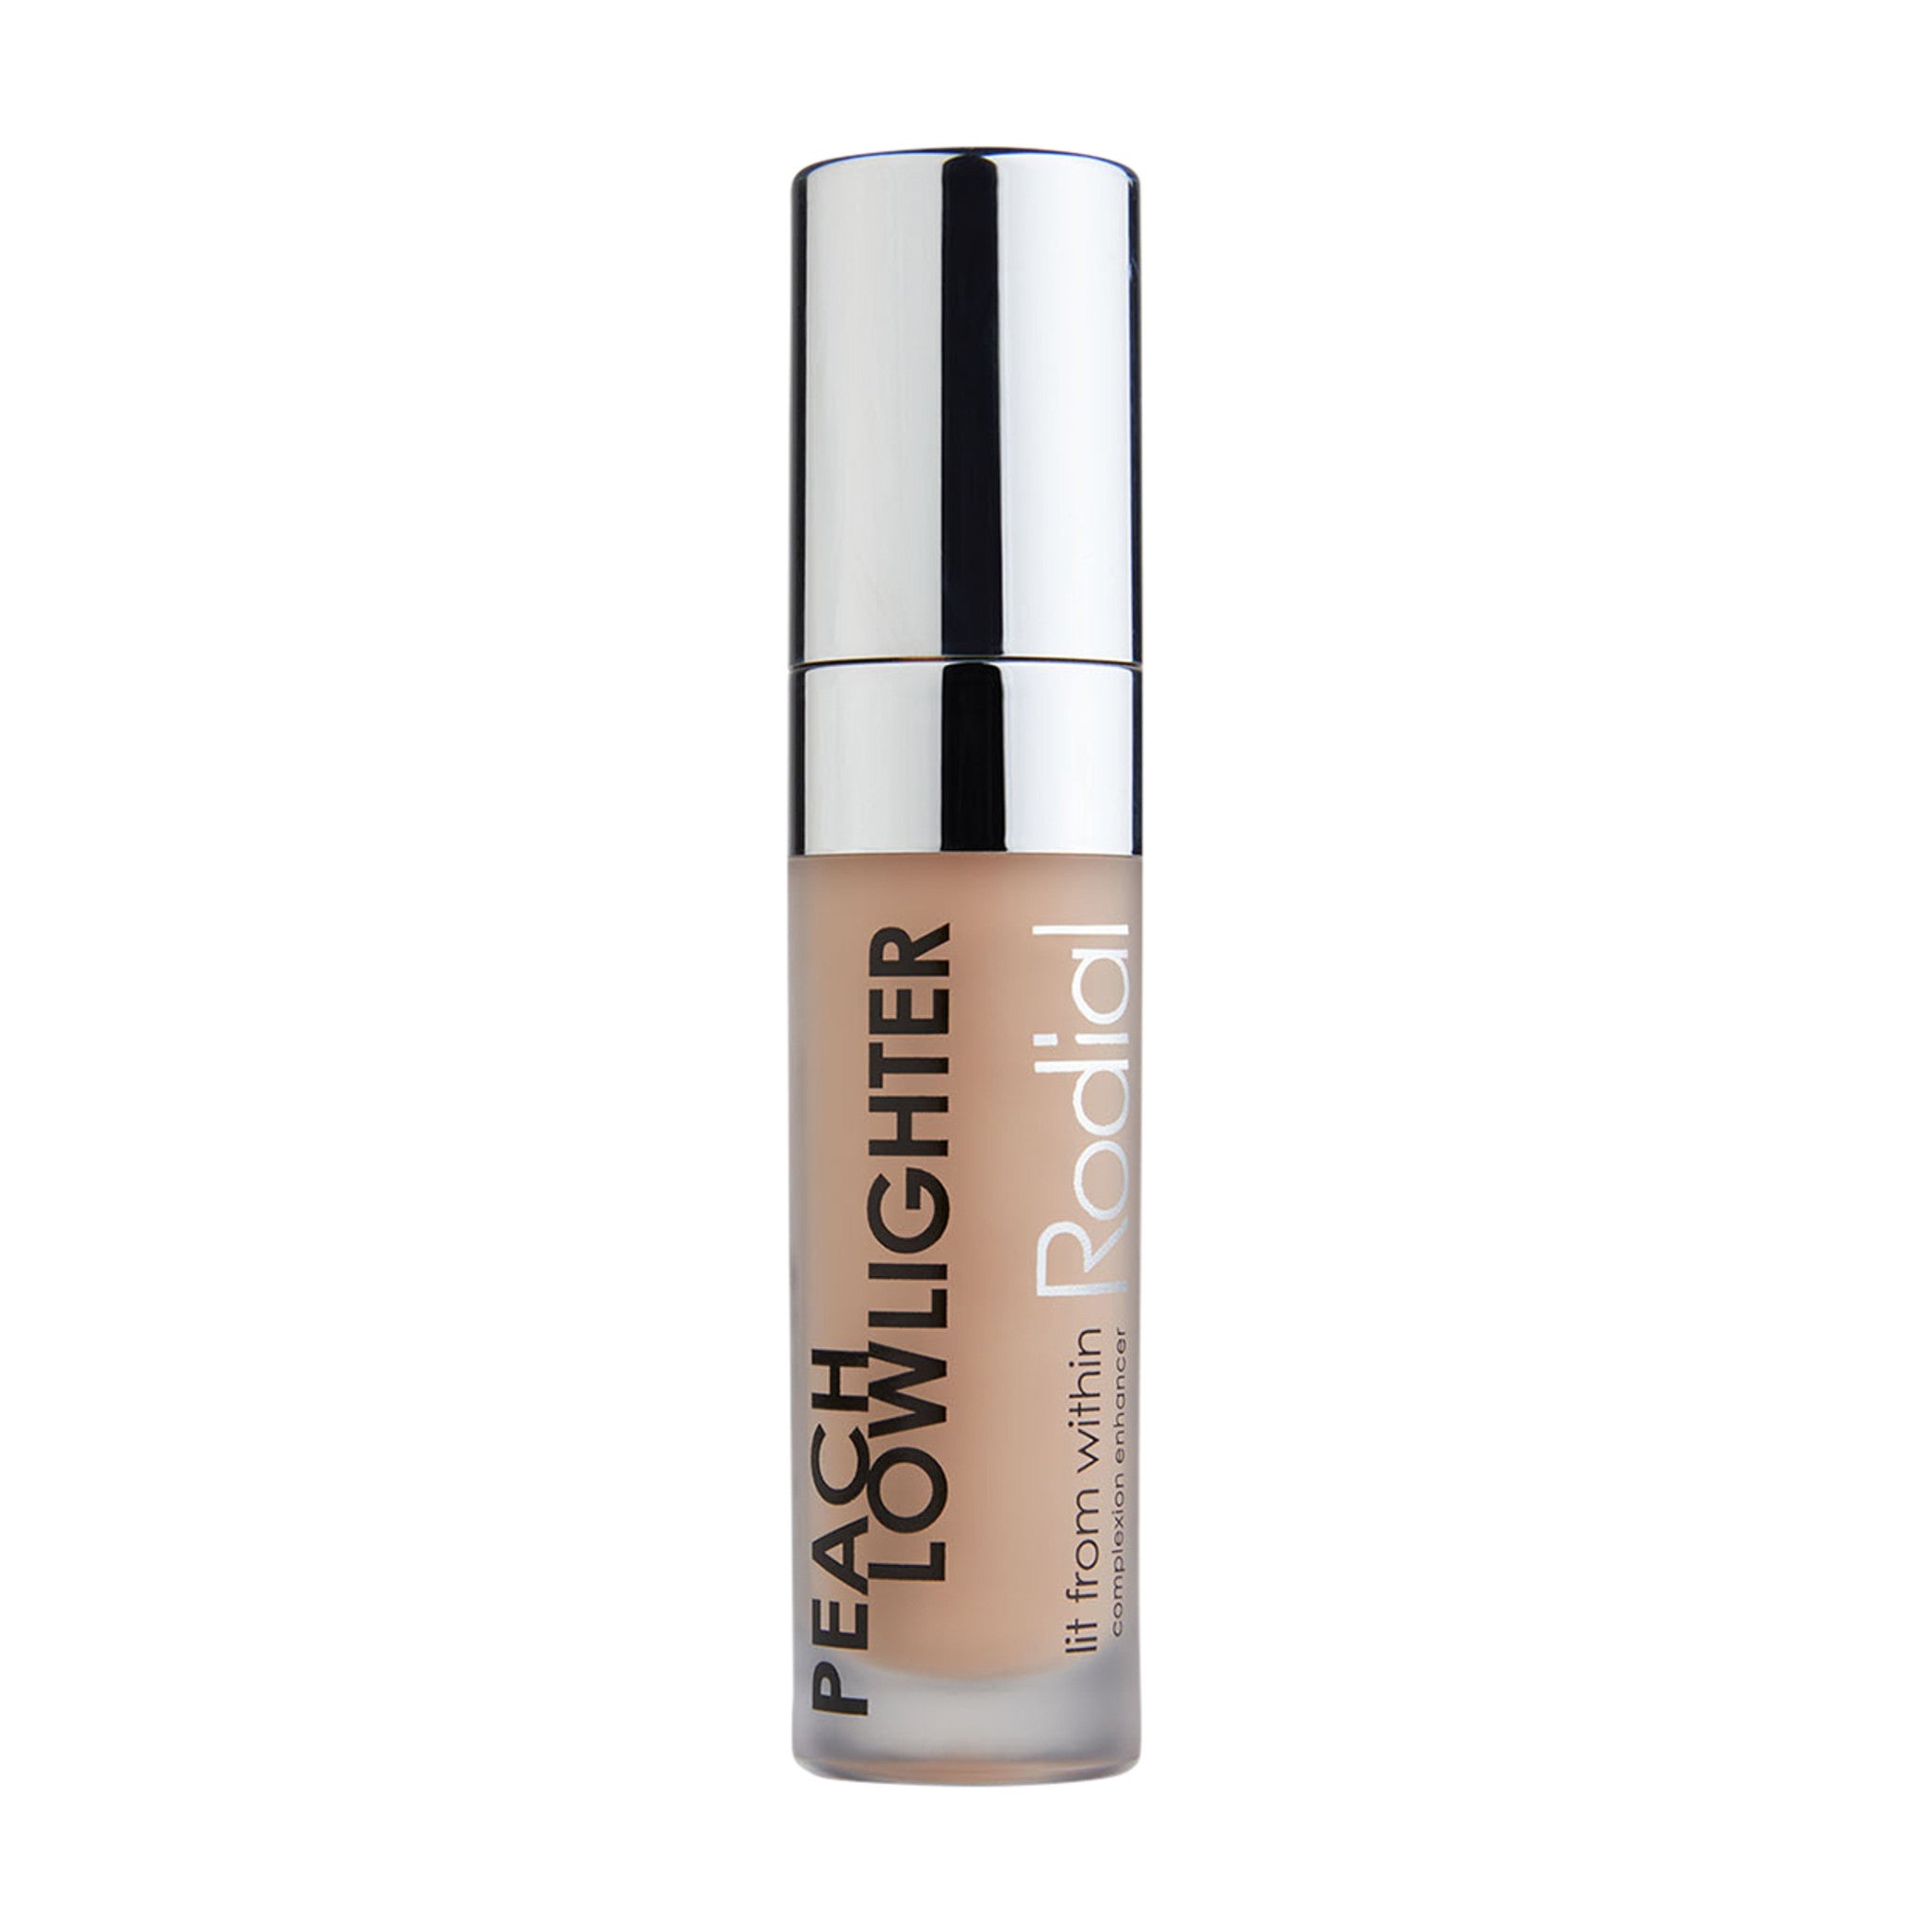 Rodial Peach Lowligher Size variant: 5.5 ml main image. This product is for medium complexions